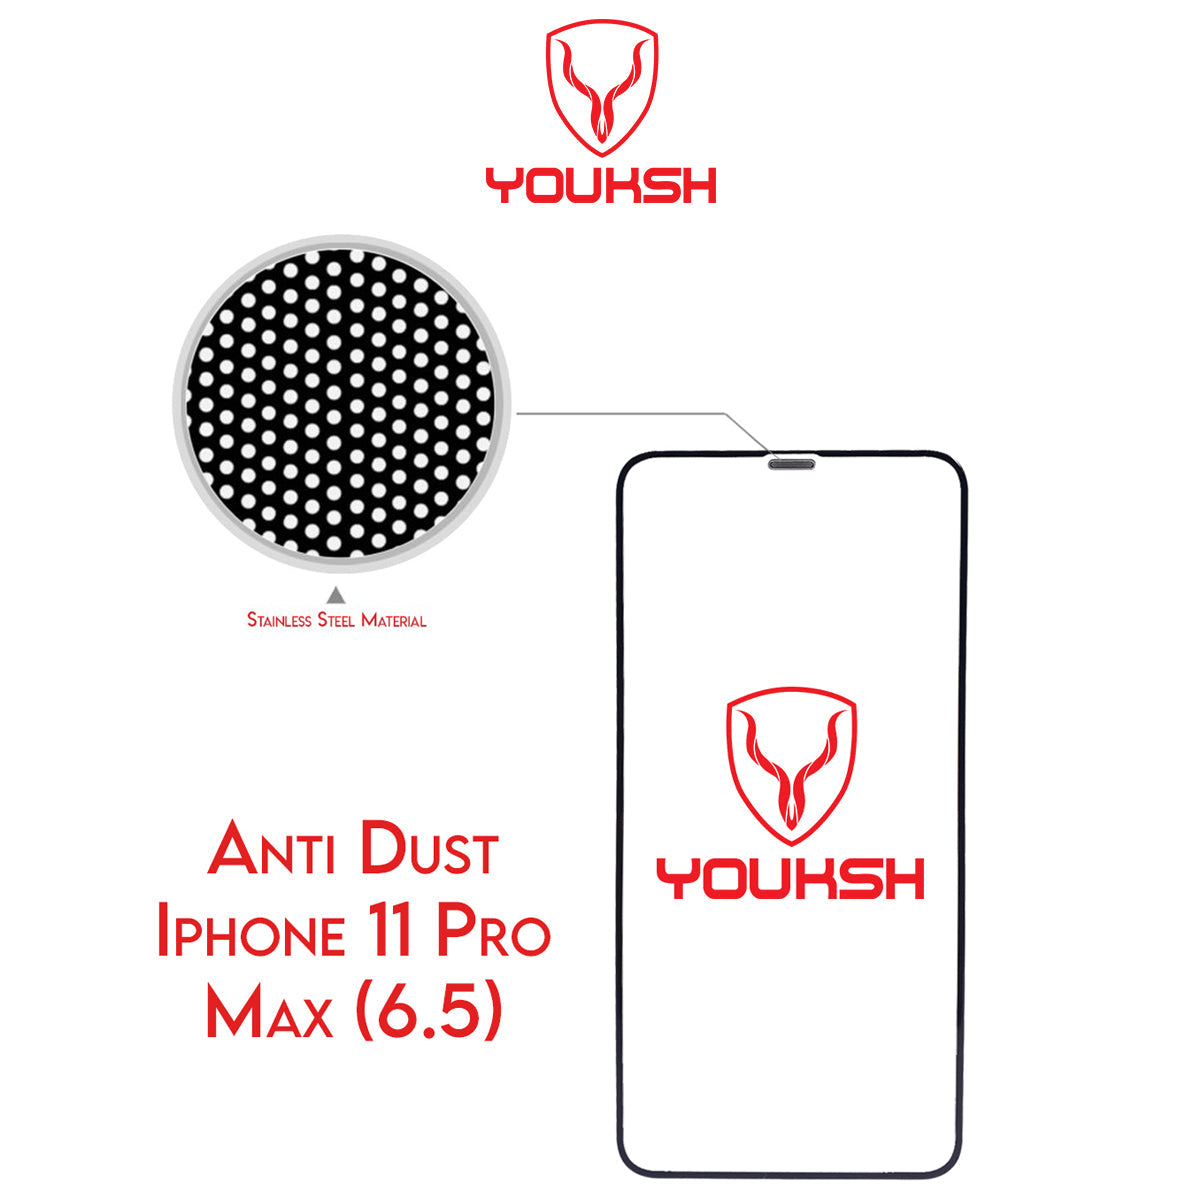 Apple iPhone 11 Pro Max - Youksh Anti Dust Glass Protector With Installation kit.